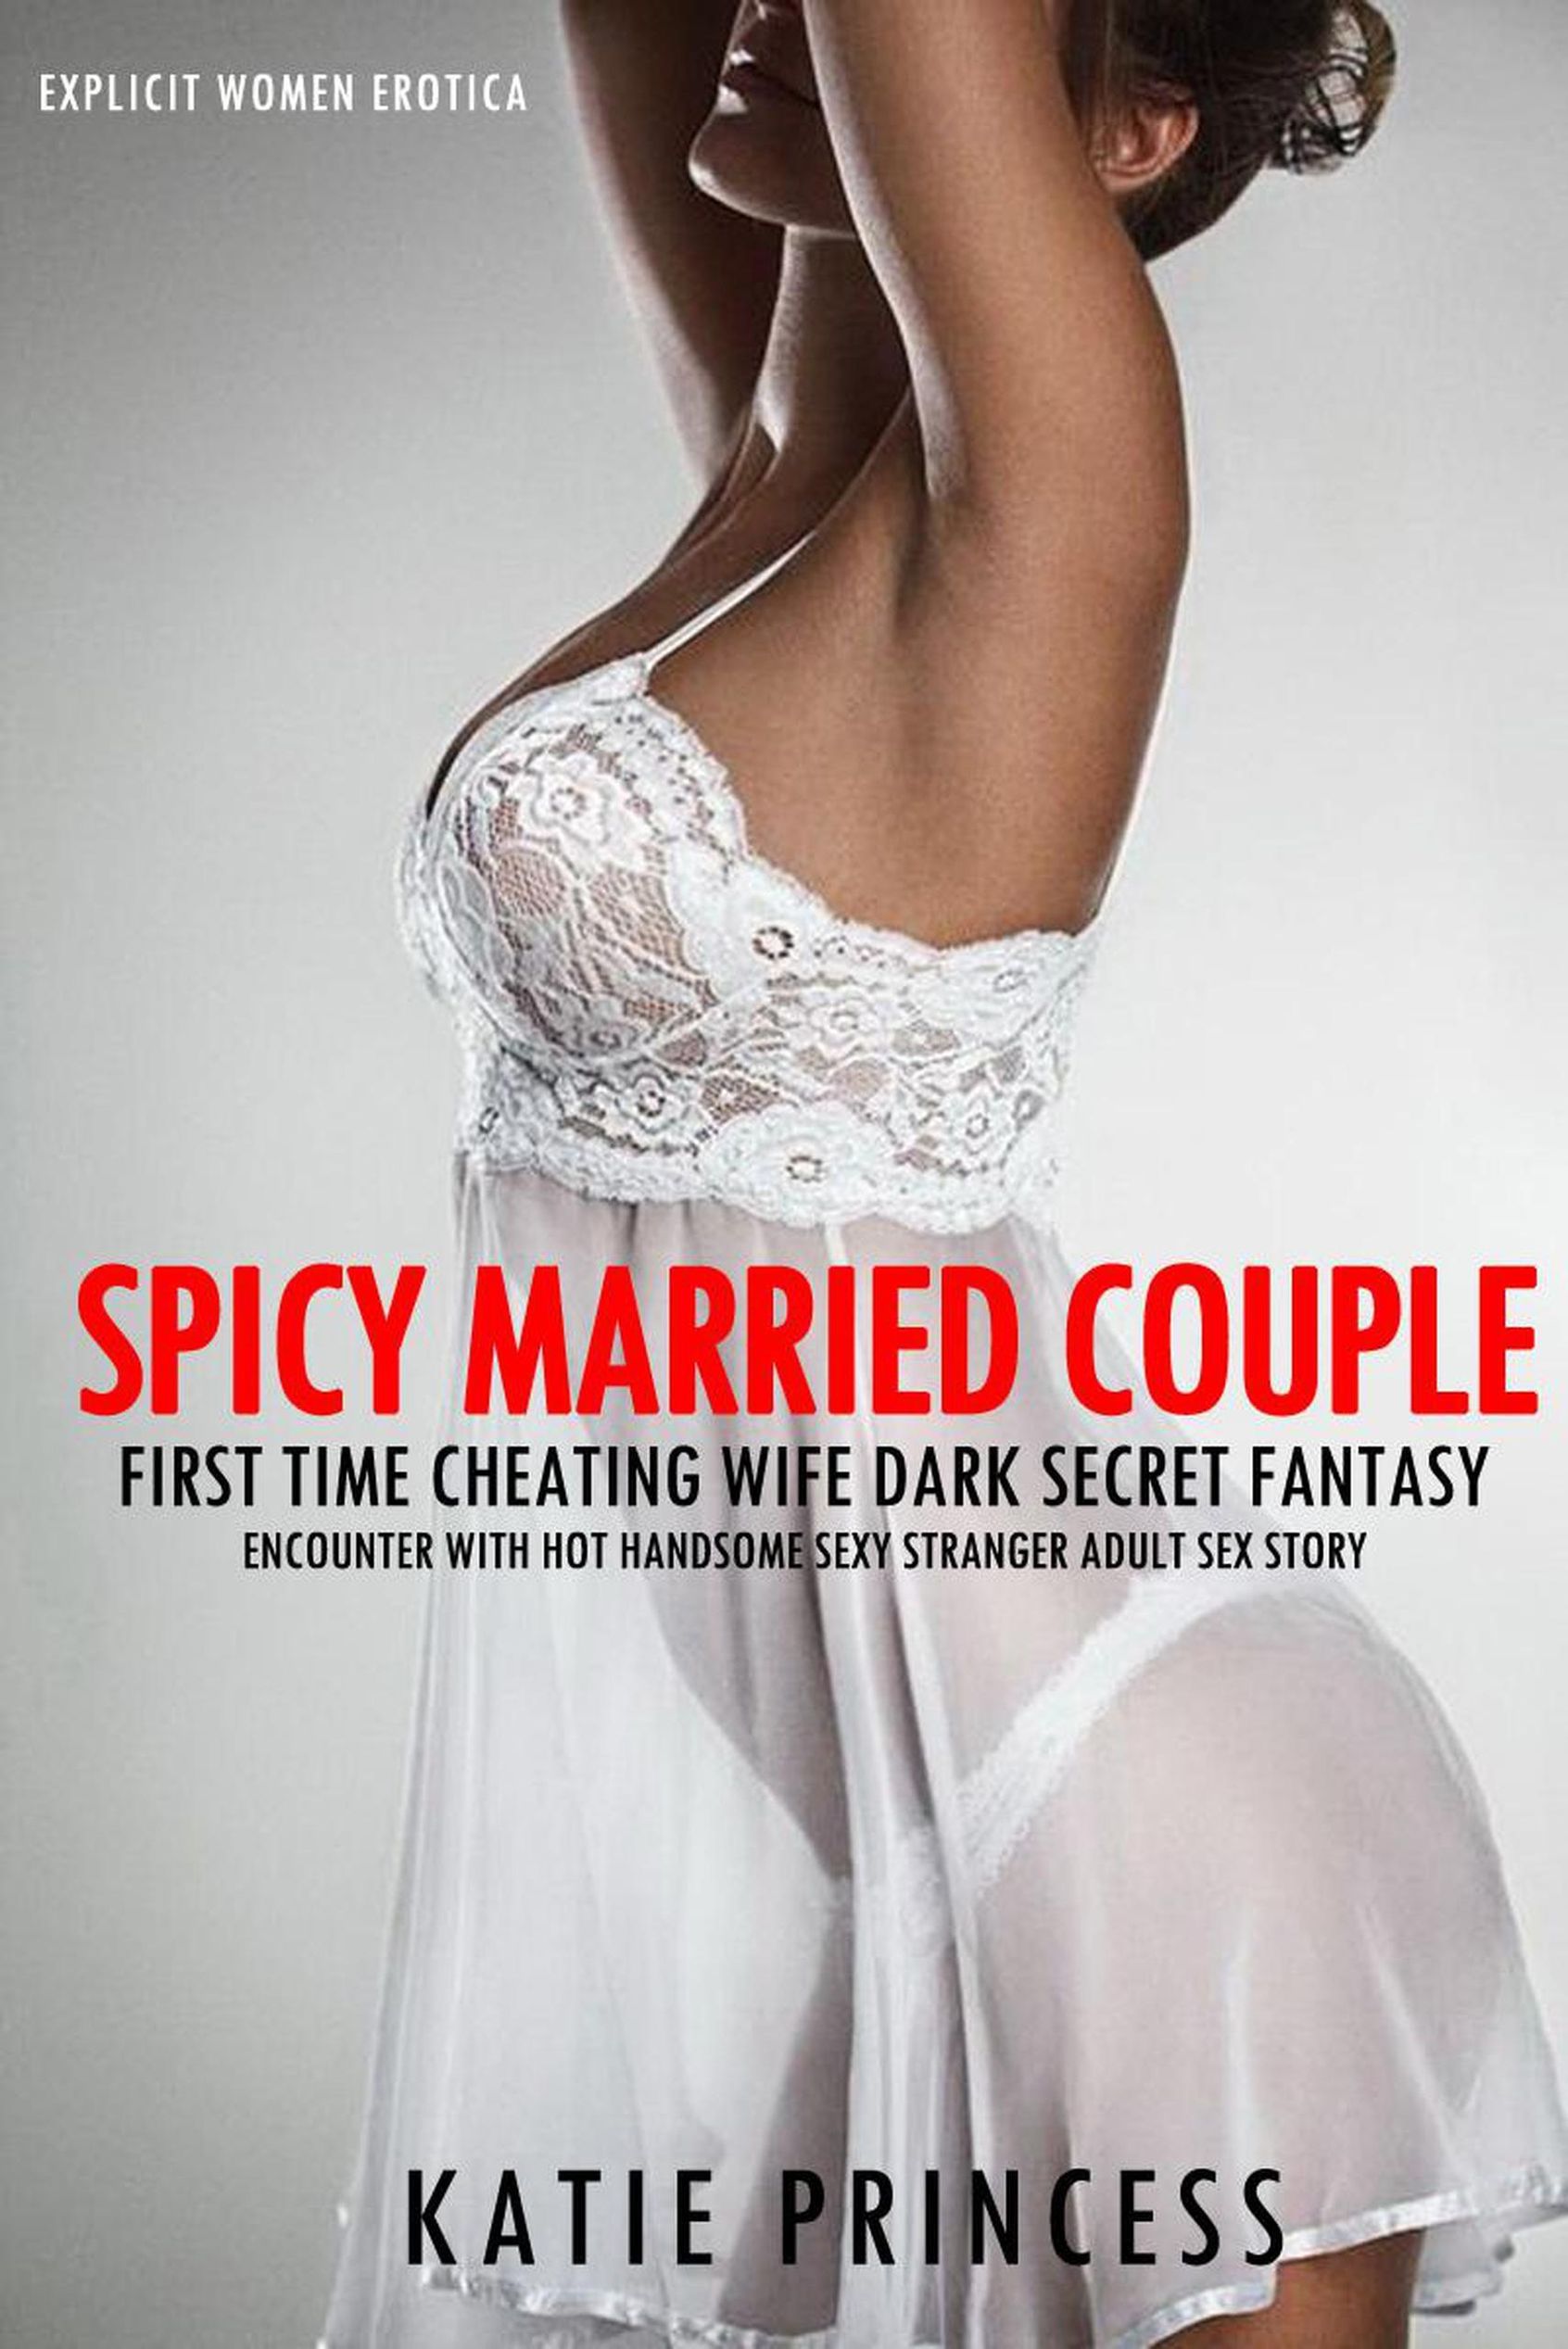 Spicy Married Couple - First Time Cheating Wife Dark Secret Fantasy  Encounter with Hot Handsome Sexy Stranger Adult Sex Story Explicit Women  Erotica, #1 Explicit Women Erotica eBook v. Katie Princess | Weltbild